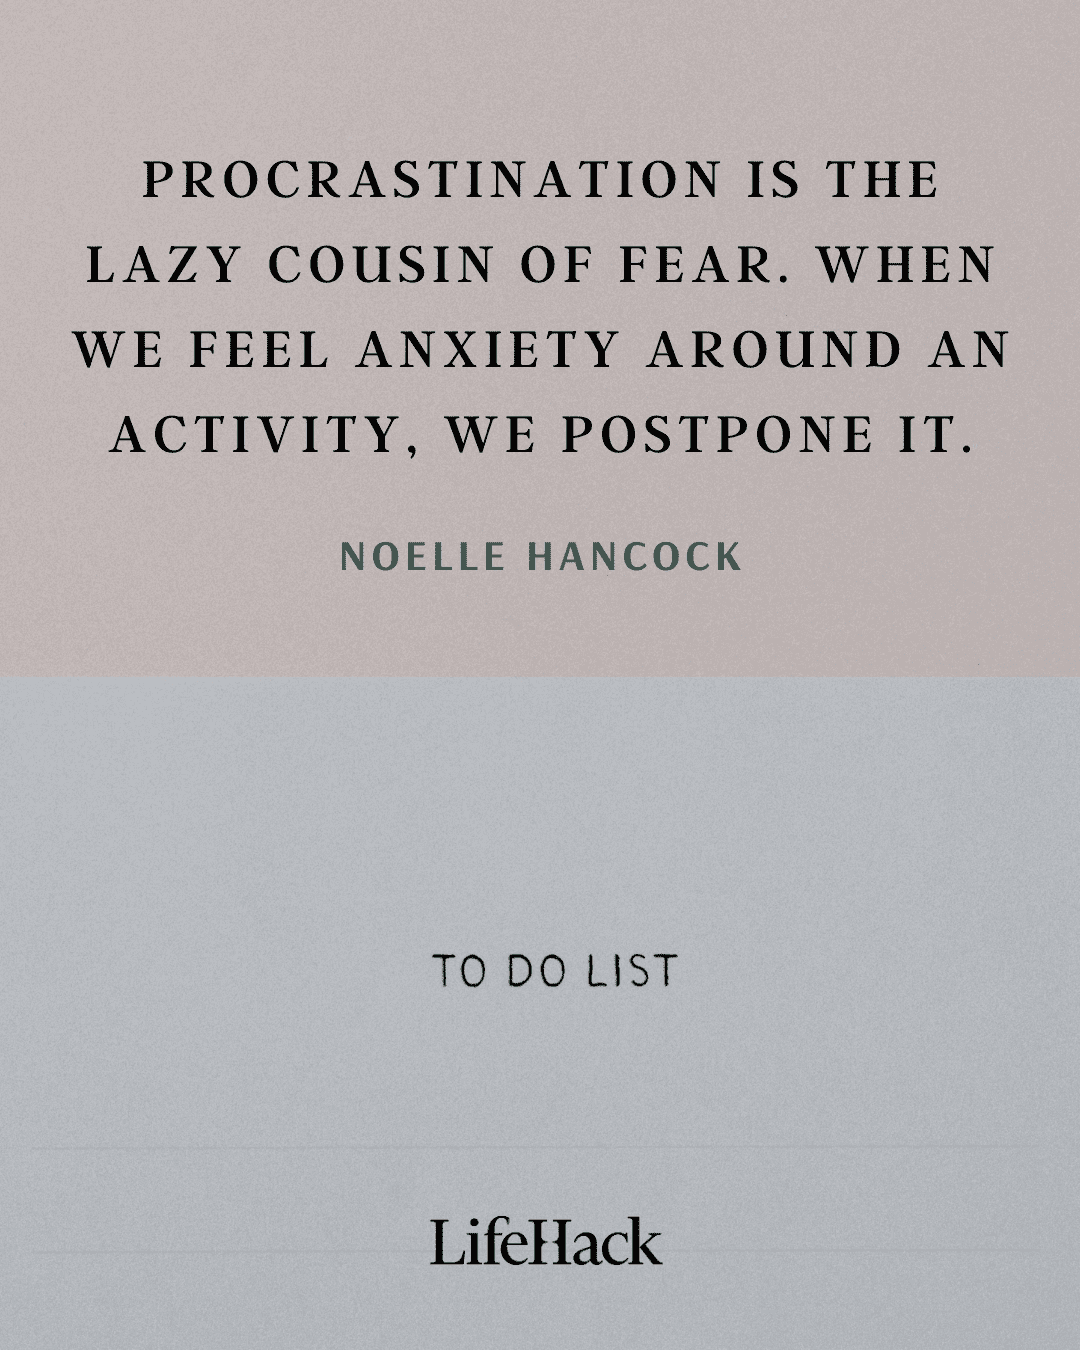 80 Best Procrastination Quotes to Get You Back to Work